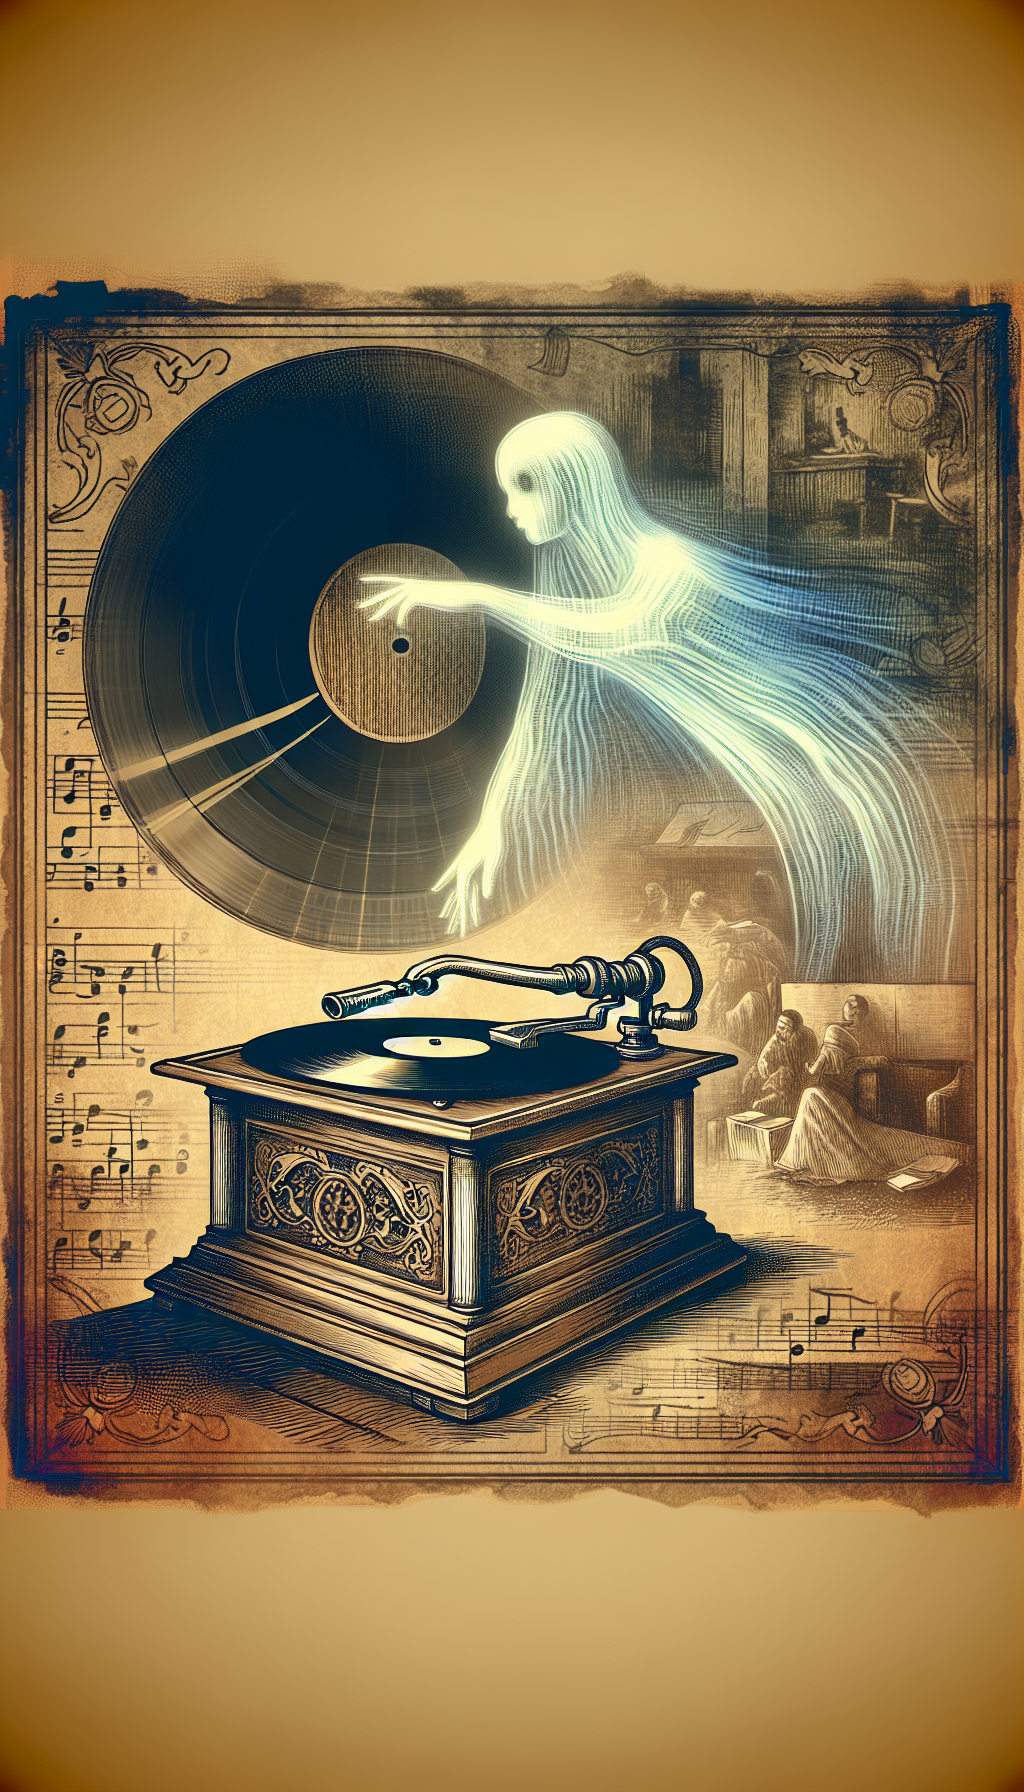 An illustration features a semi-transparent, ghostly Victrola, overlaid on a sepia-toned collage of historical music events. A modern hand places an antique vinyl on the Victrola, signifying its lingering value. The image skillfully merges Victorian etching, photography, and contemporary line art to symbolize the timeless essence of the phonograph's influence across the ages.